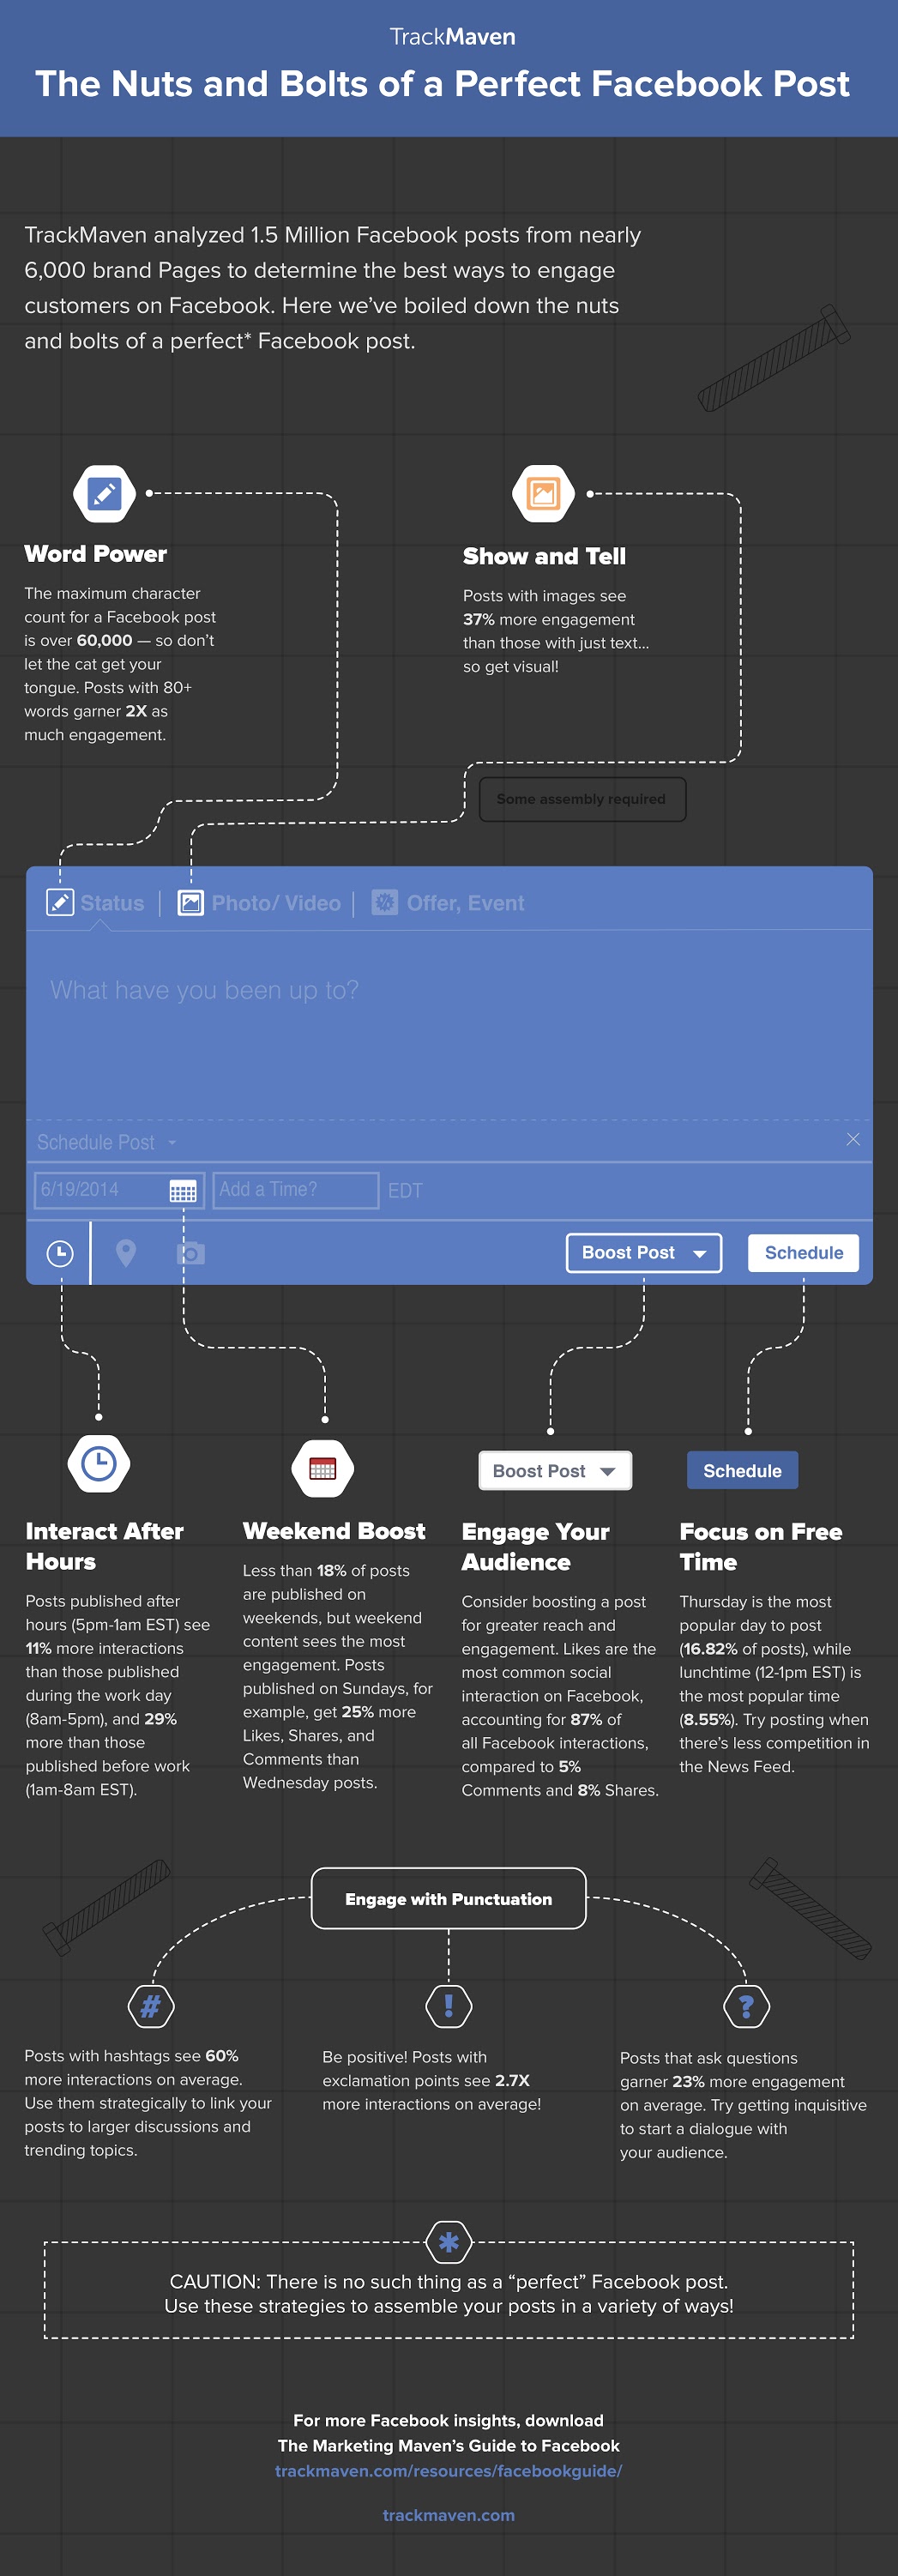 The Nuts And Bolts Of A Perfect Facebook Post - #Infographic #facebook #socialmedia